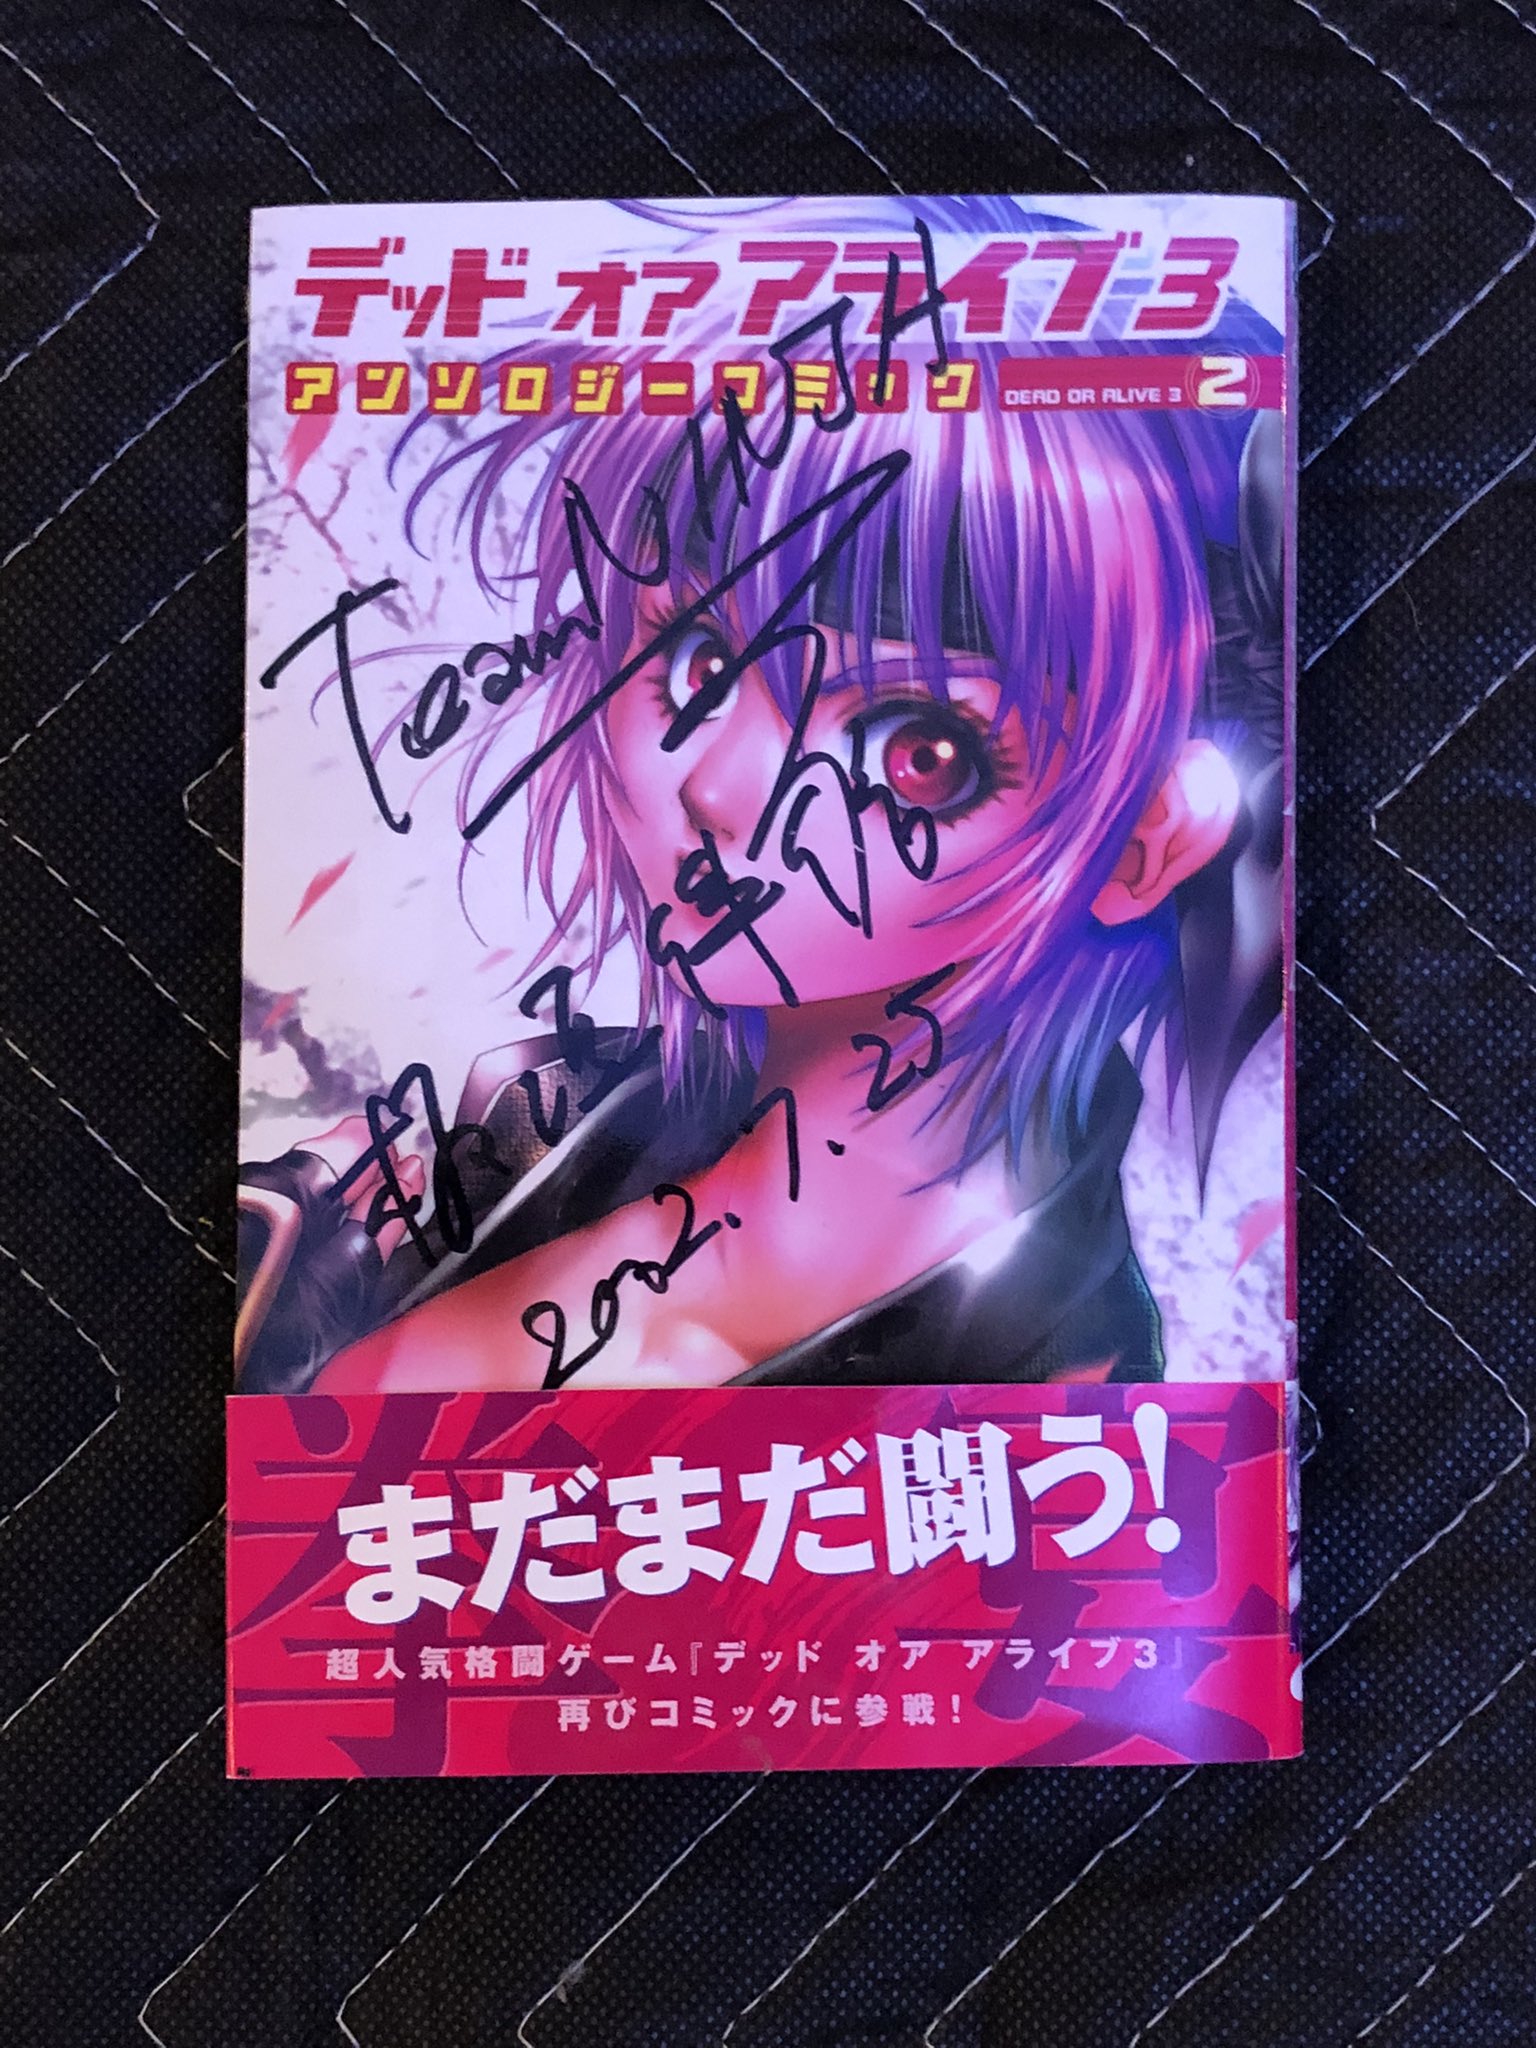 Ed Fries on X: For today I present an autographed copy of a Dead or Alive  3 manga given to my by Team Ninja in Japan. #xbox20 #xbox #ogxbox   / X